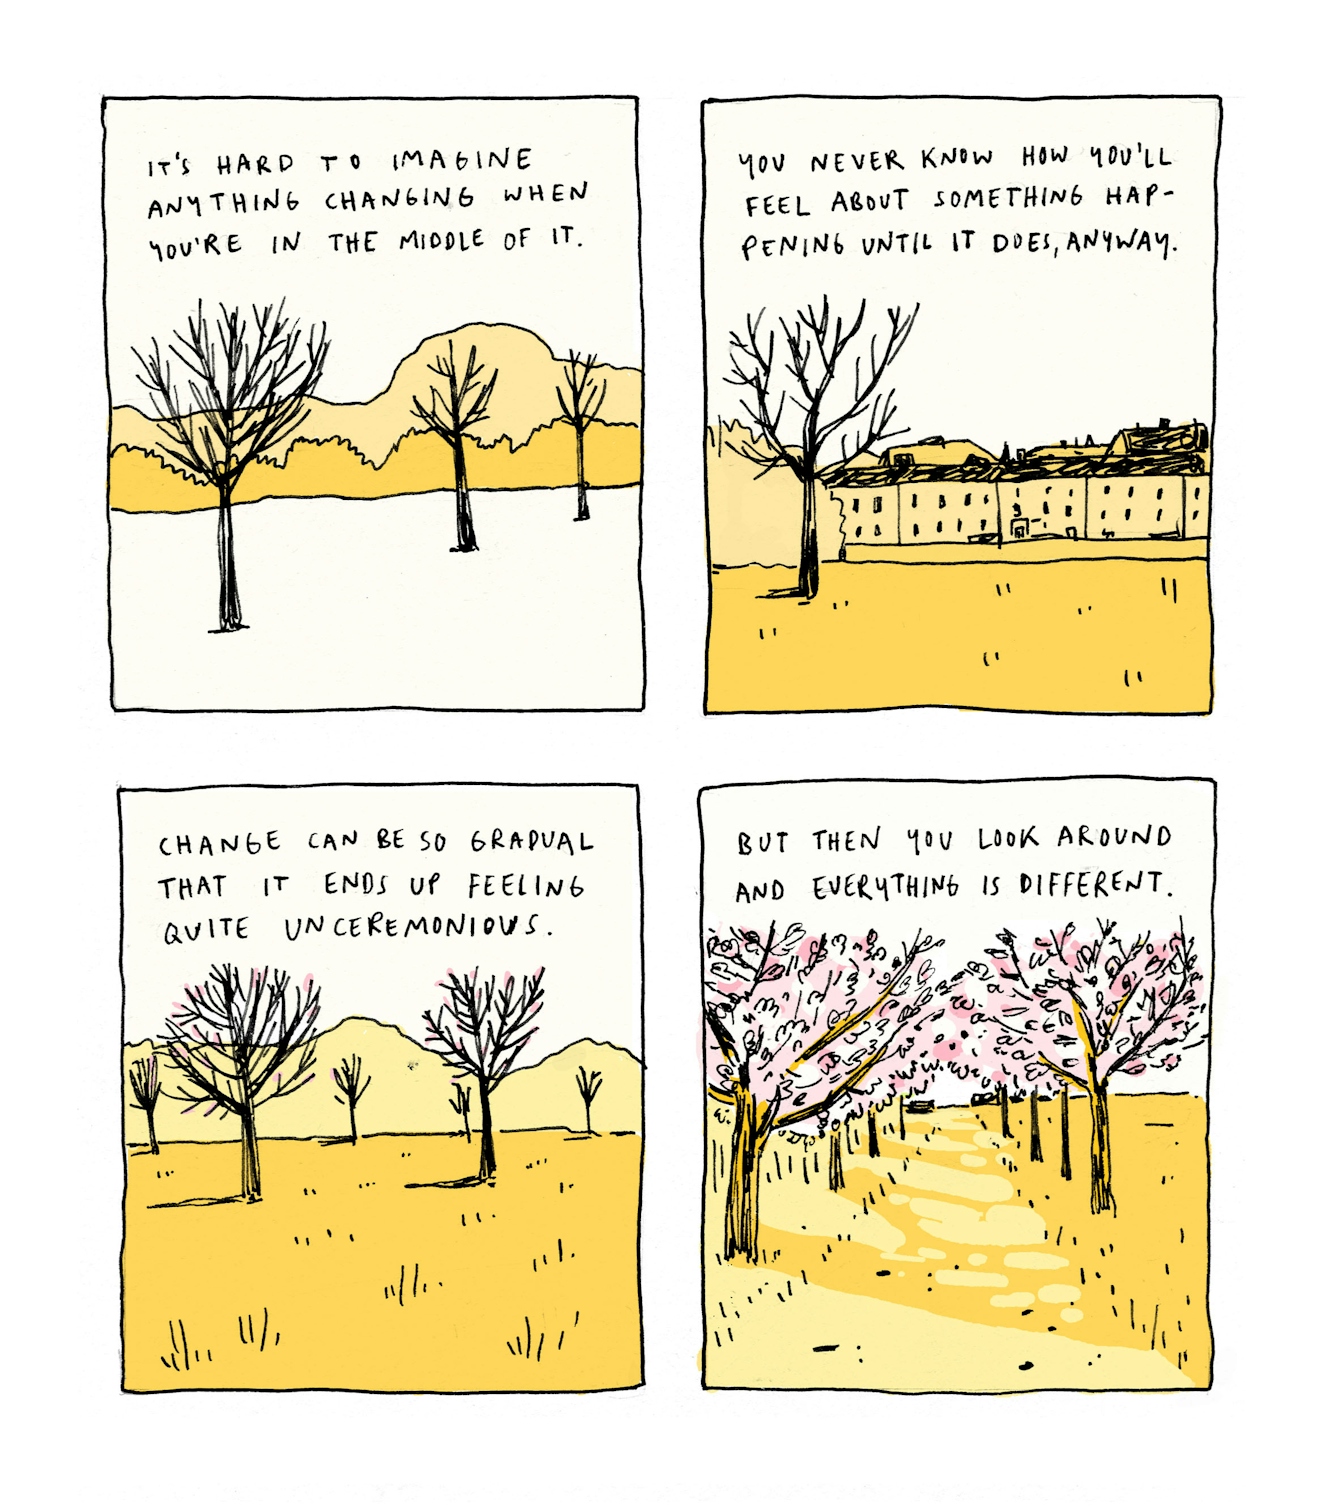 First panel:
Text: It’s hard to imagine anything changing when you’re in the middle of it.
A view of bare trees leading off into the distance. There is snow on the ground.

Second panel:
Text: You never know how to feel about something happening until it does, anyway
A view of a different bare tree. Behind a wall, a row of Edinburgh tenements is visible.

Third panel:
Text: Change can be so gradual that it ends up feeling quite unceremonious
In this view of the park, a hazy silhouette of Arhur’s Seat is visible in the background. The trees in the foreground have some subtle pink buds.
 
Fourth panel:
Text: But then you look around and everything is different
The viewer looks at a path, lined by trees on both sides which are in full blossom. The path vanishes into the center of the panel. Sunlight is filtering through the trees, onto the path.